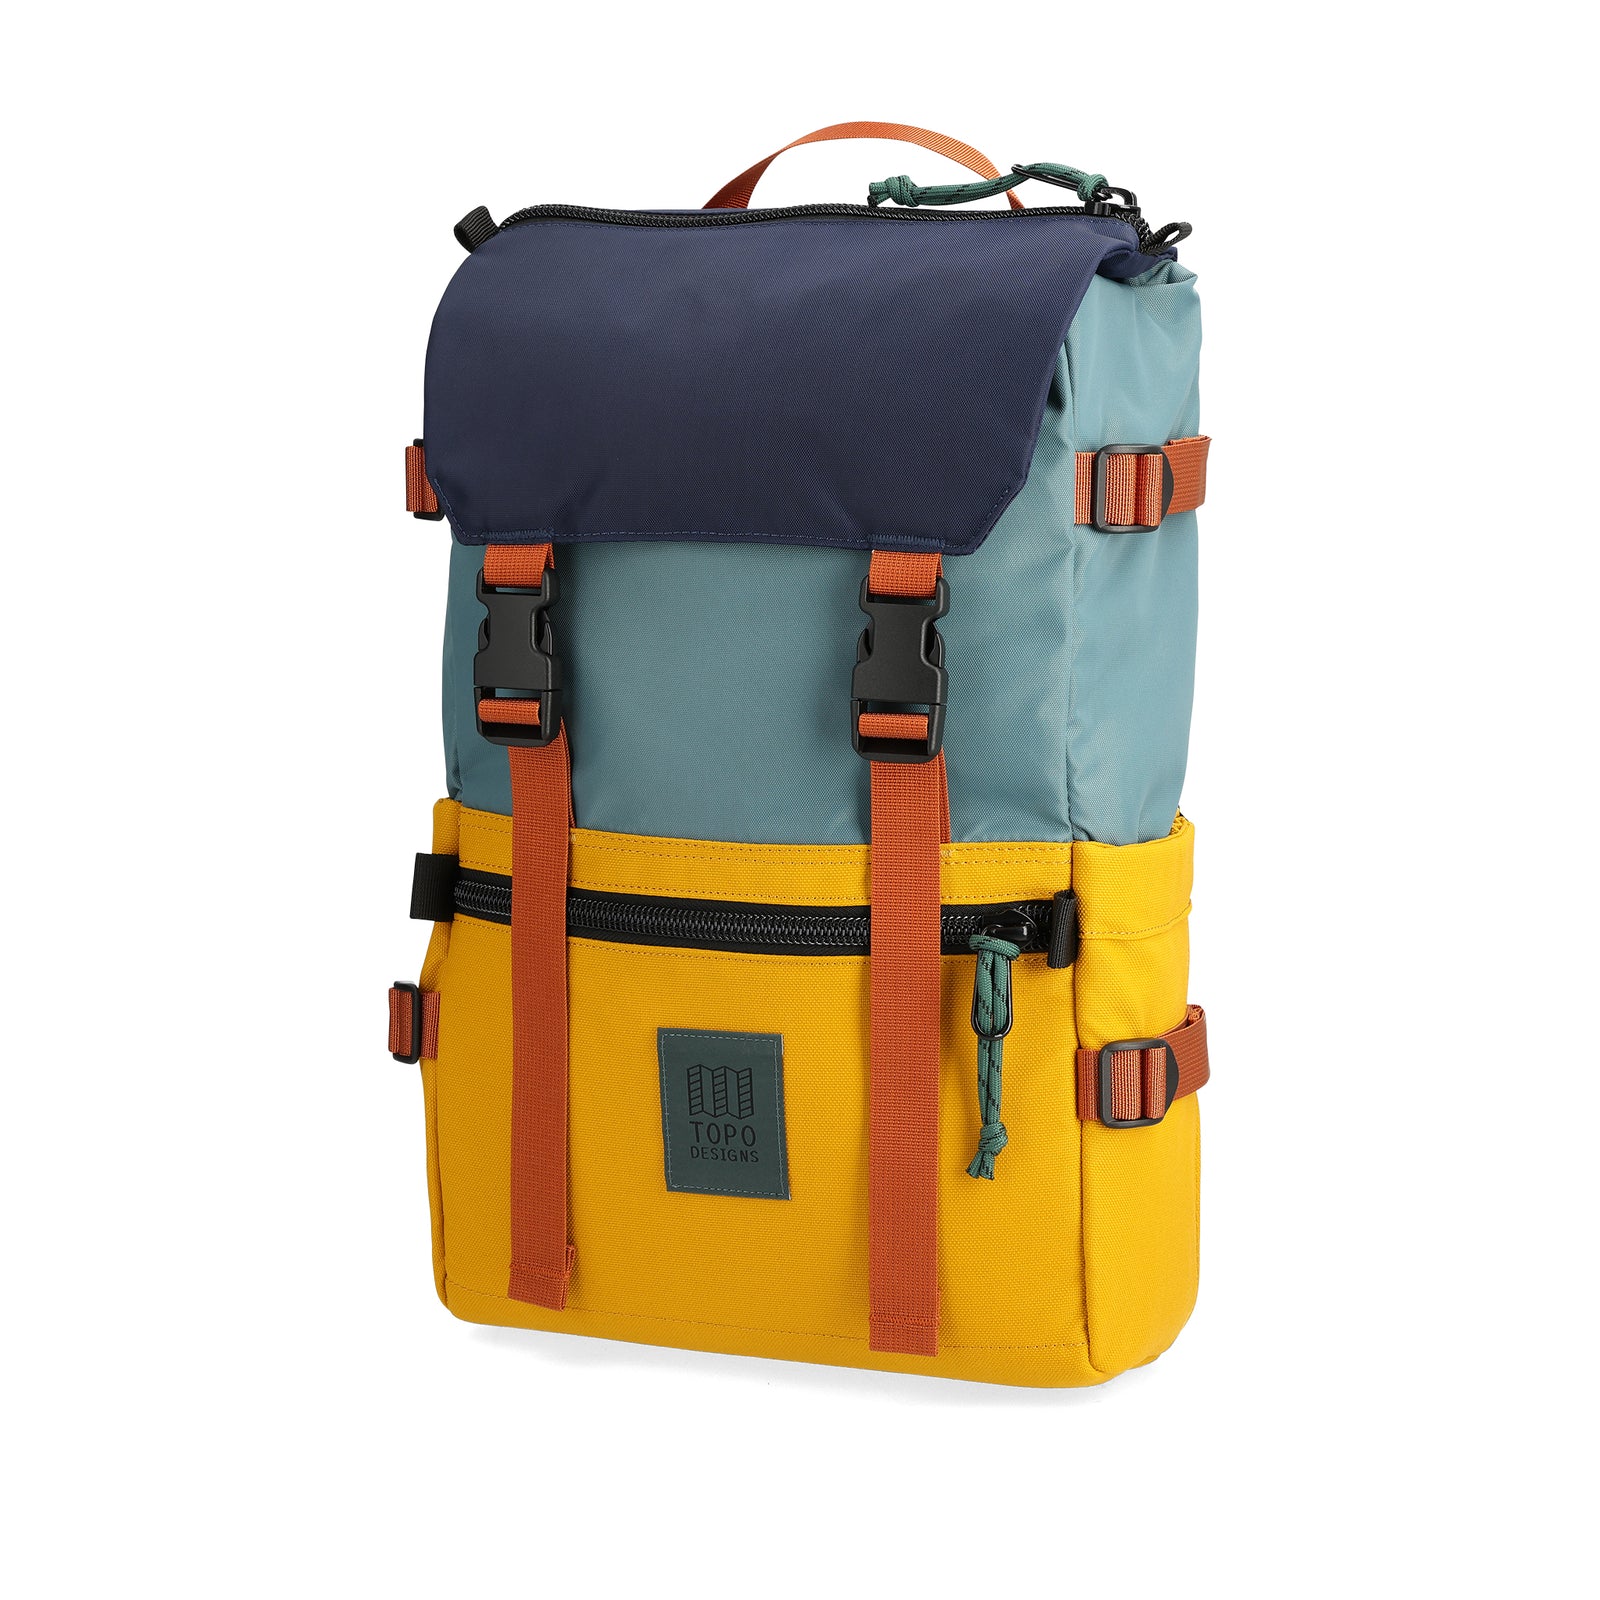 Front View of Topo Designs Rover Pack Classic in "Sea Pine / Mustard"